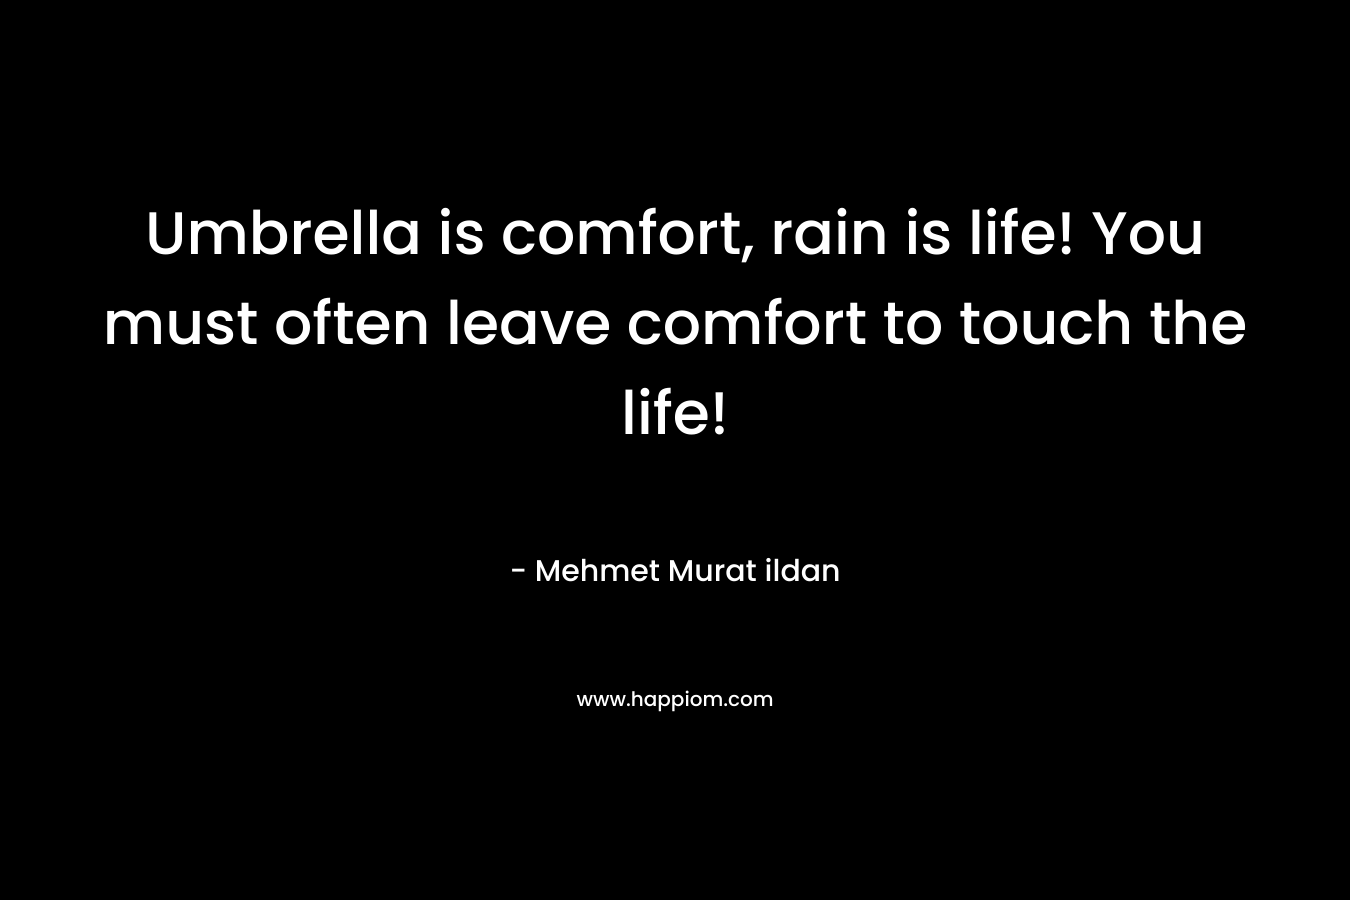 Umbrella is comfort, rain is life! You must often leave comfort to touch the life!